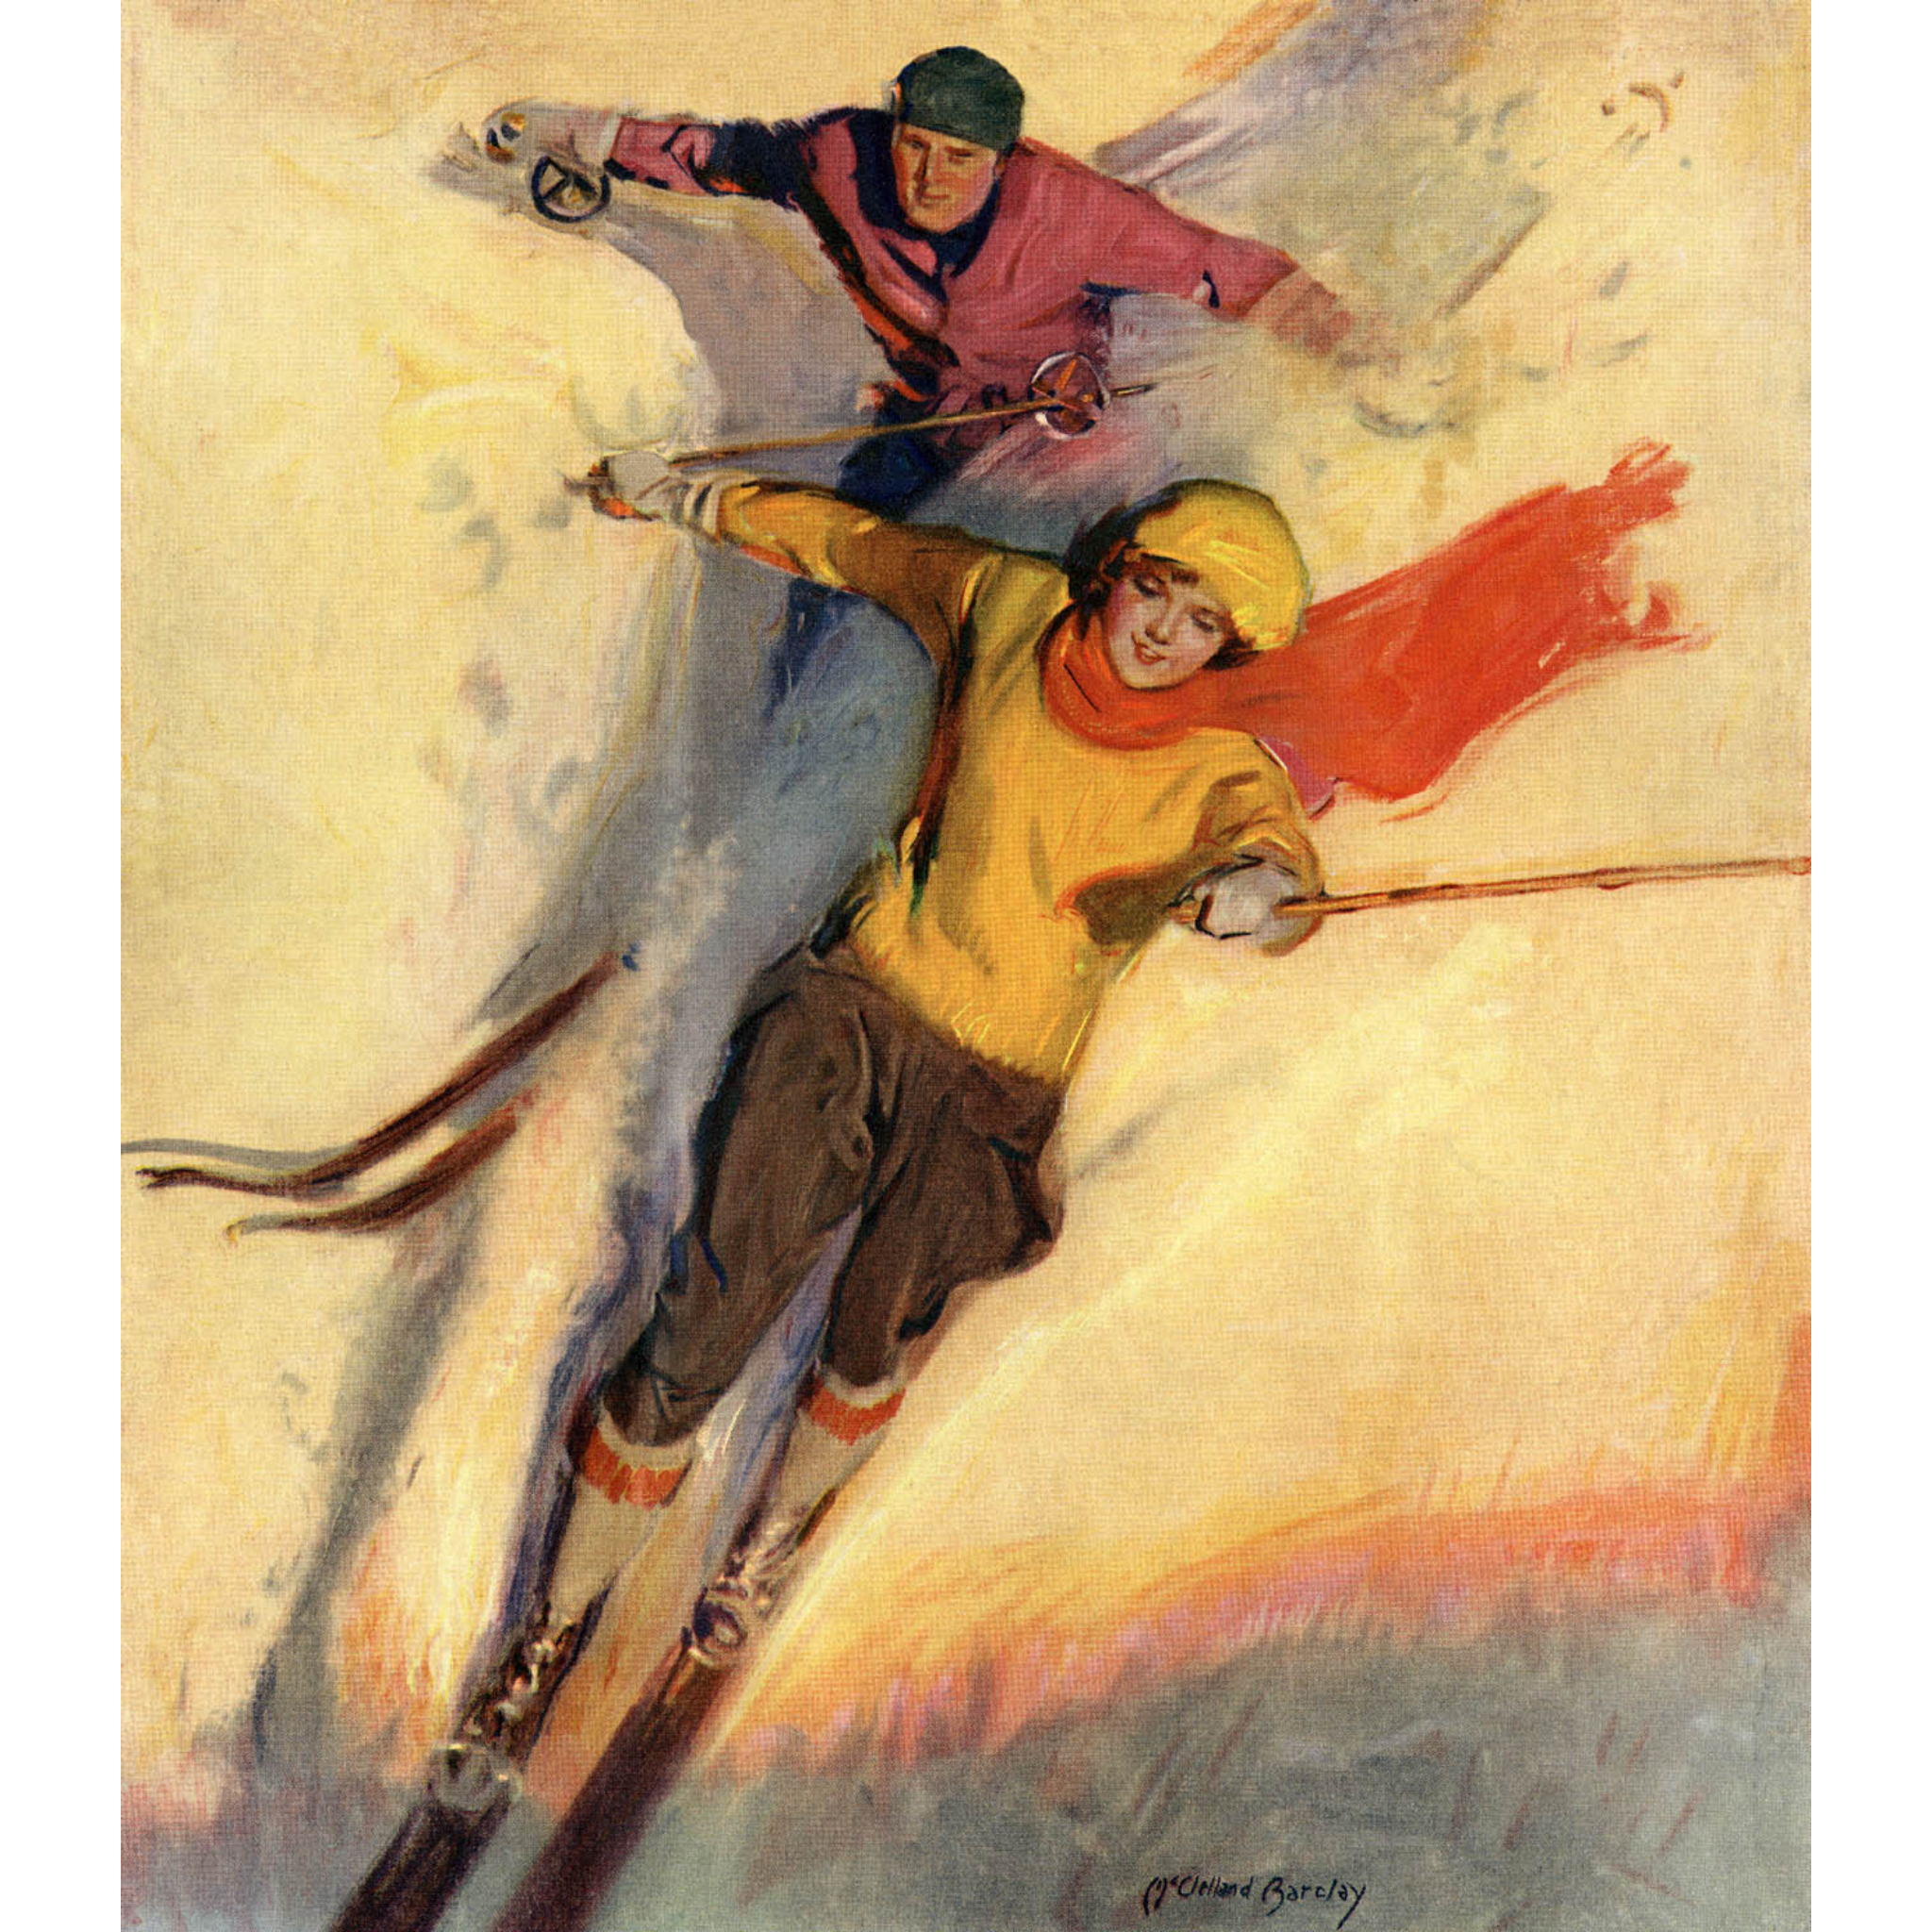 Couple Skiing - ca. 1940 Lithograph